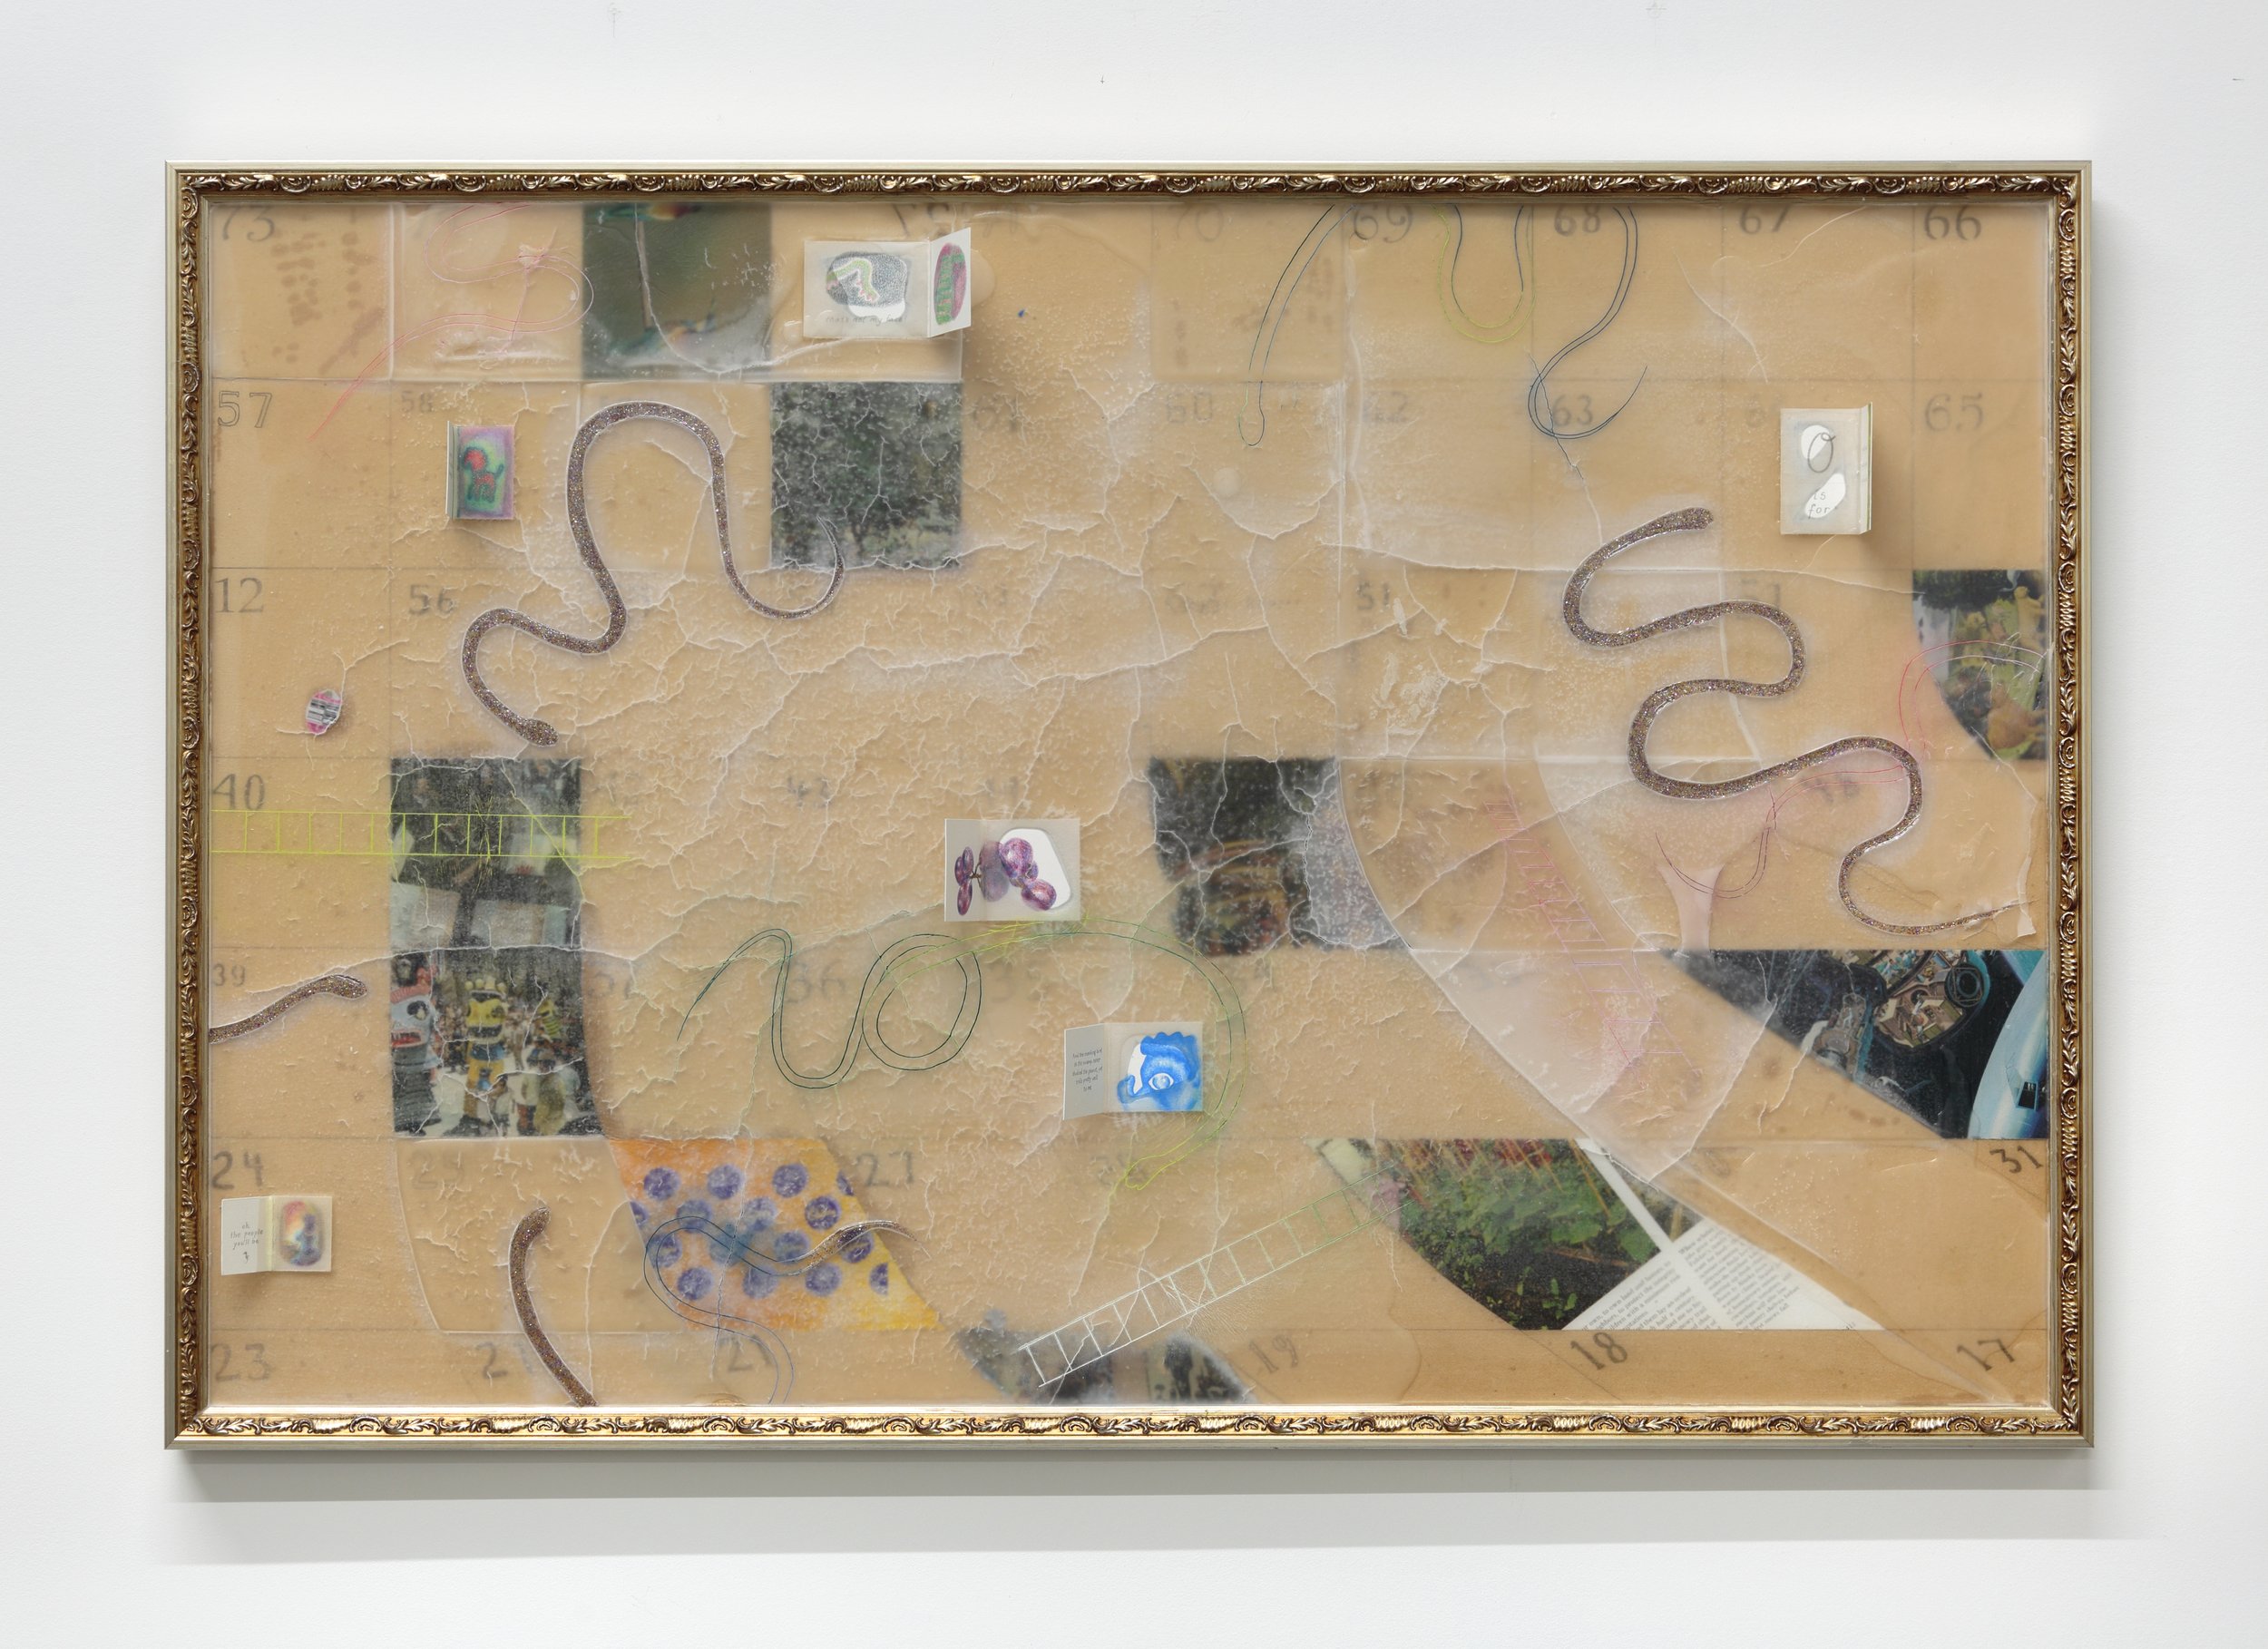   that ain’t plot (1)    2023   Ornate frame, paraffin wax, paper, resin, glitter, found images, pencil, oil paint.   90 x 60 cm   Image courtesy of Tim Gresham 